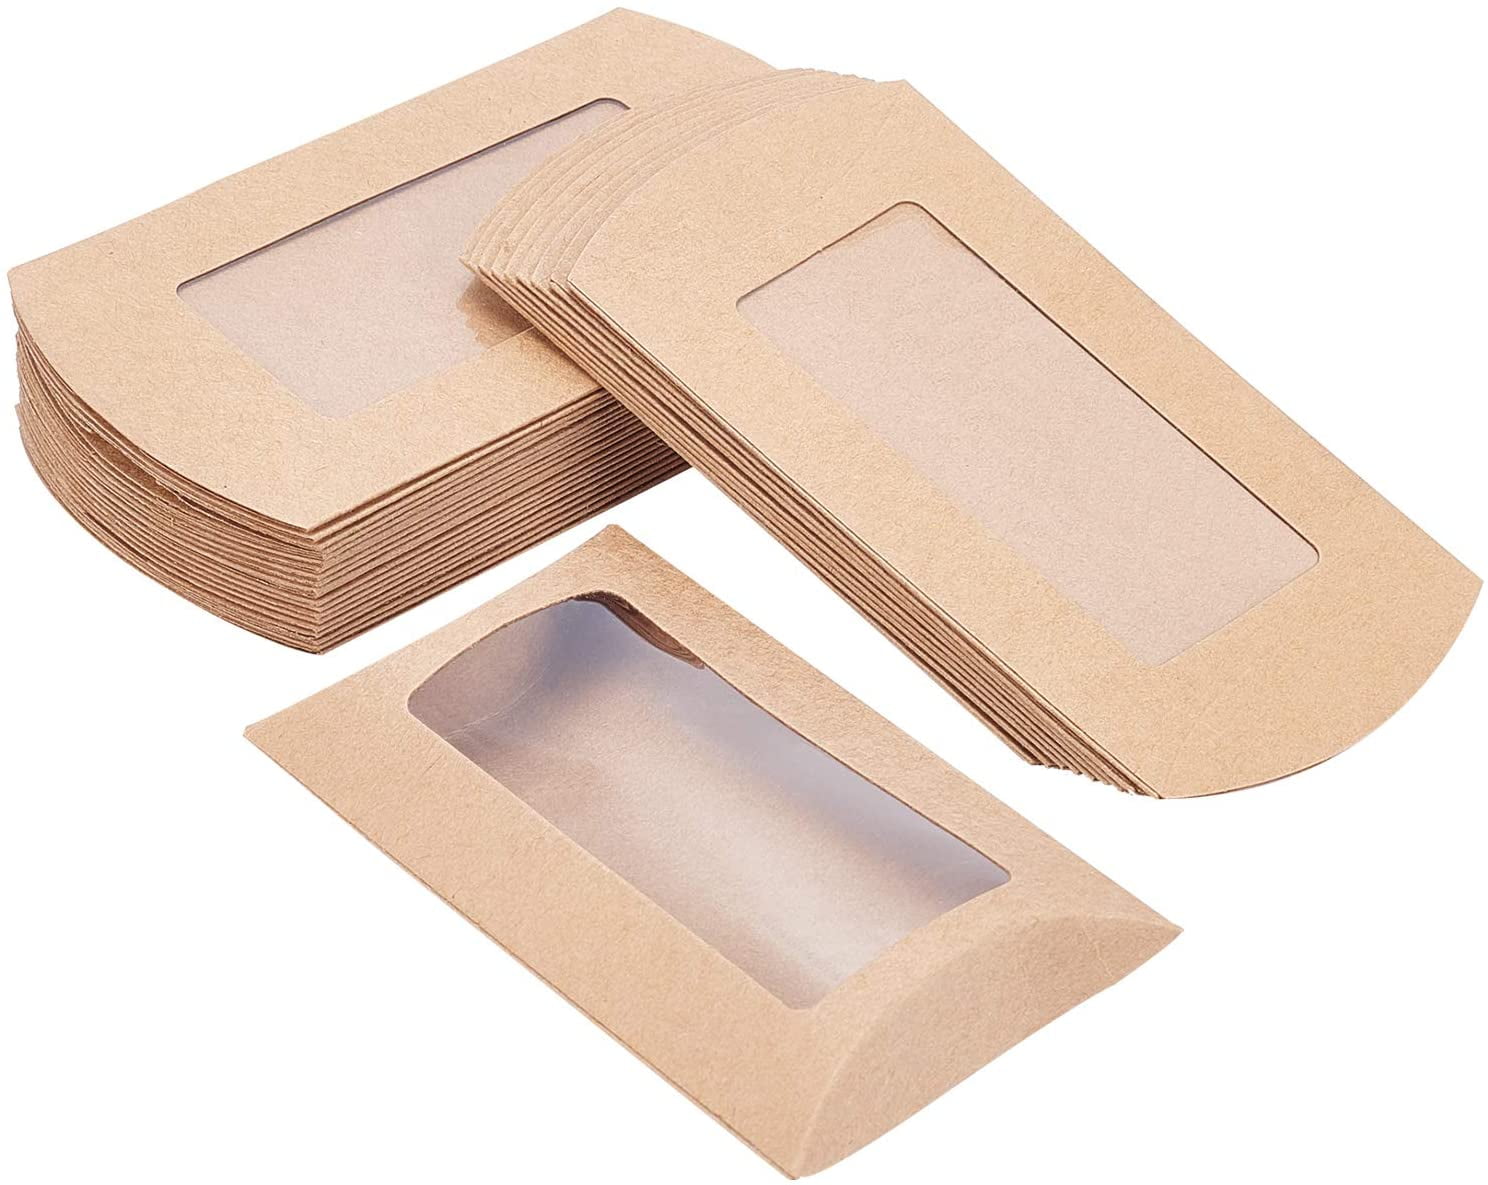  Chinco 30 Pcs Kraft Paper Box with Clear Window